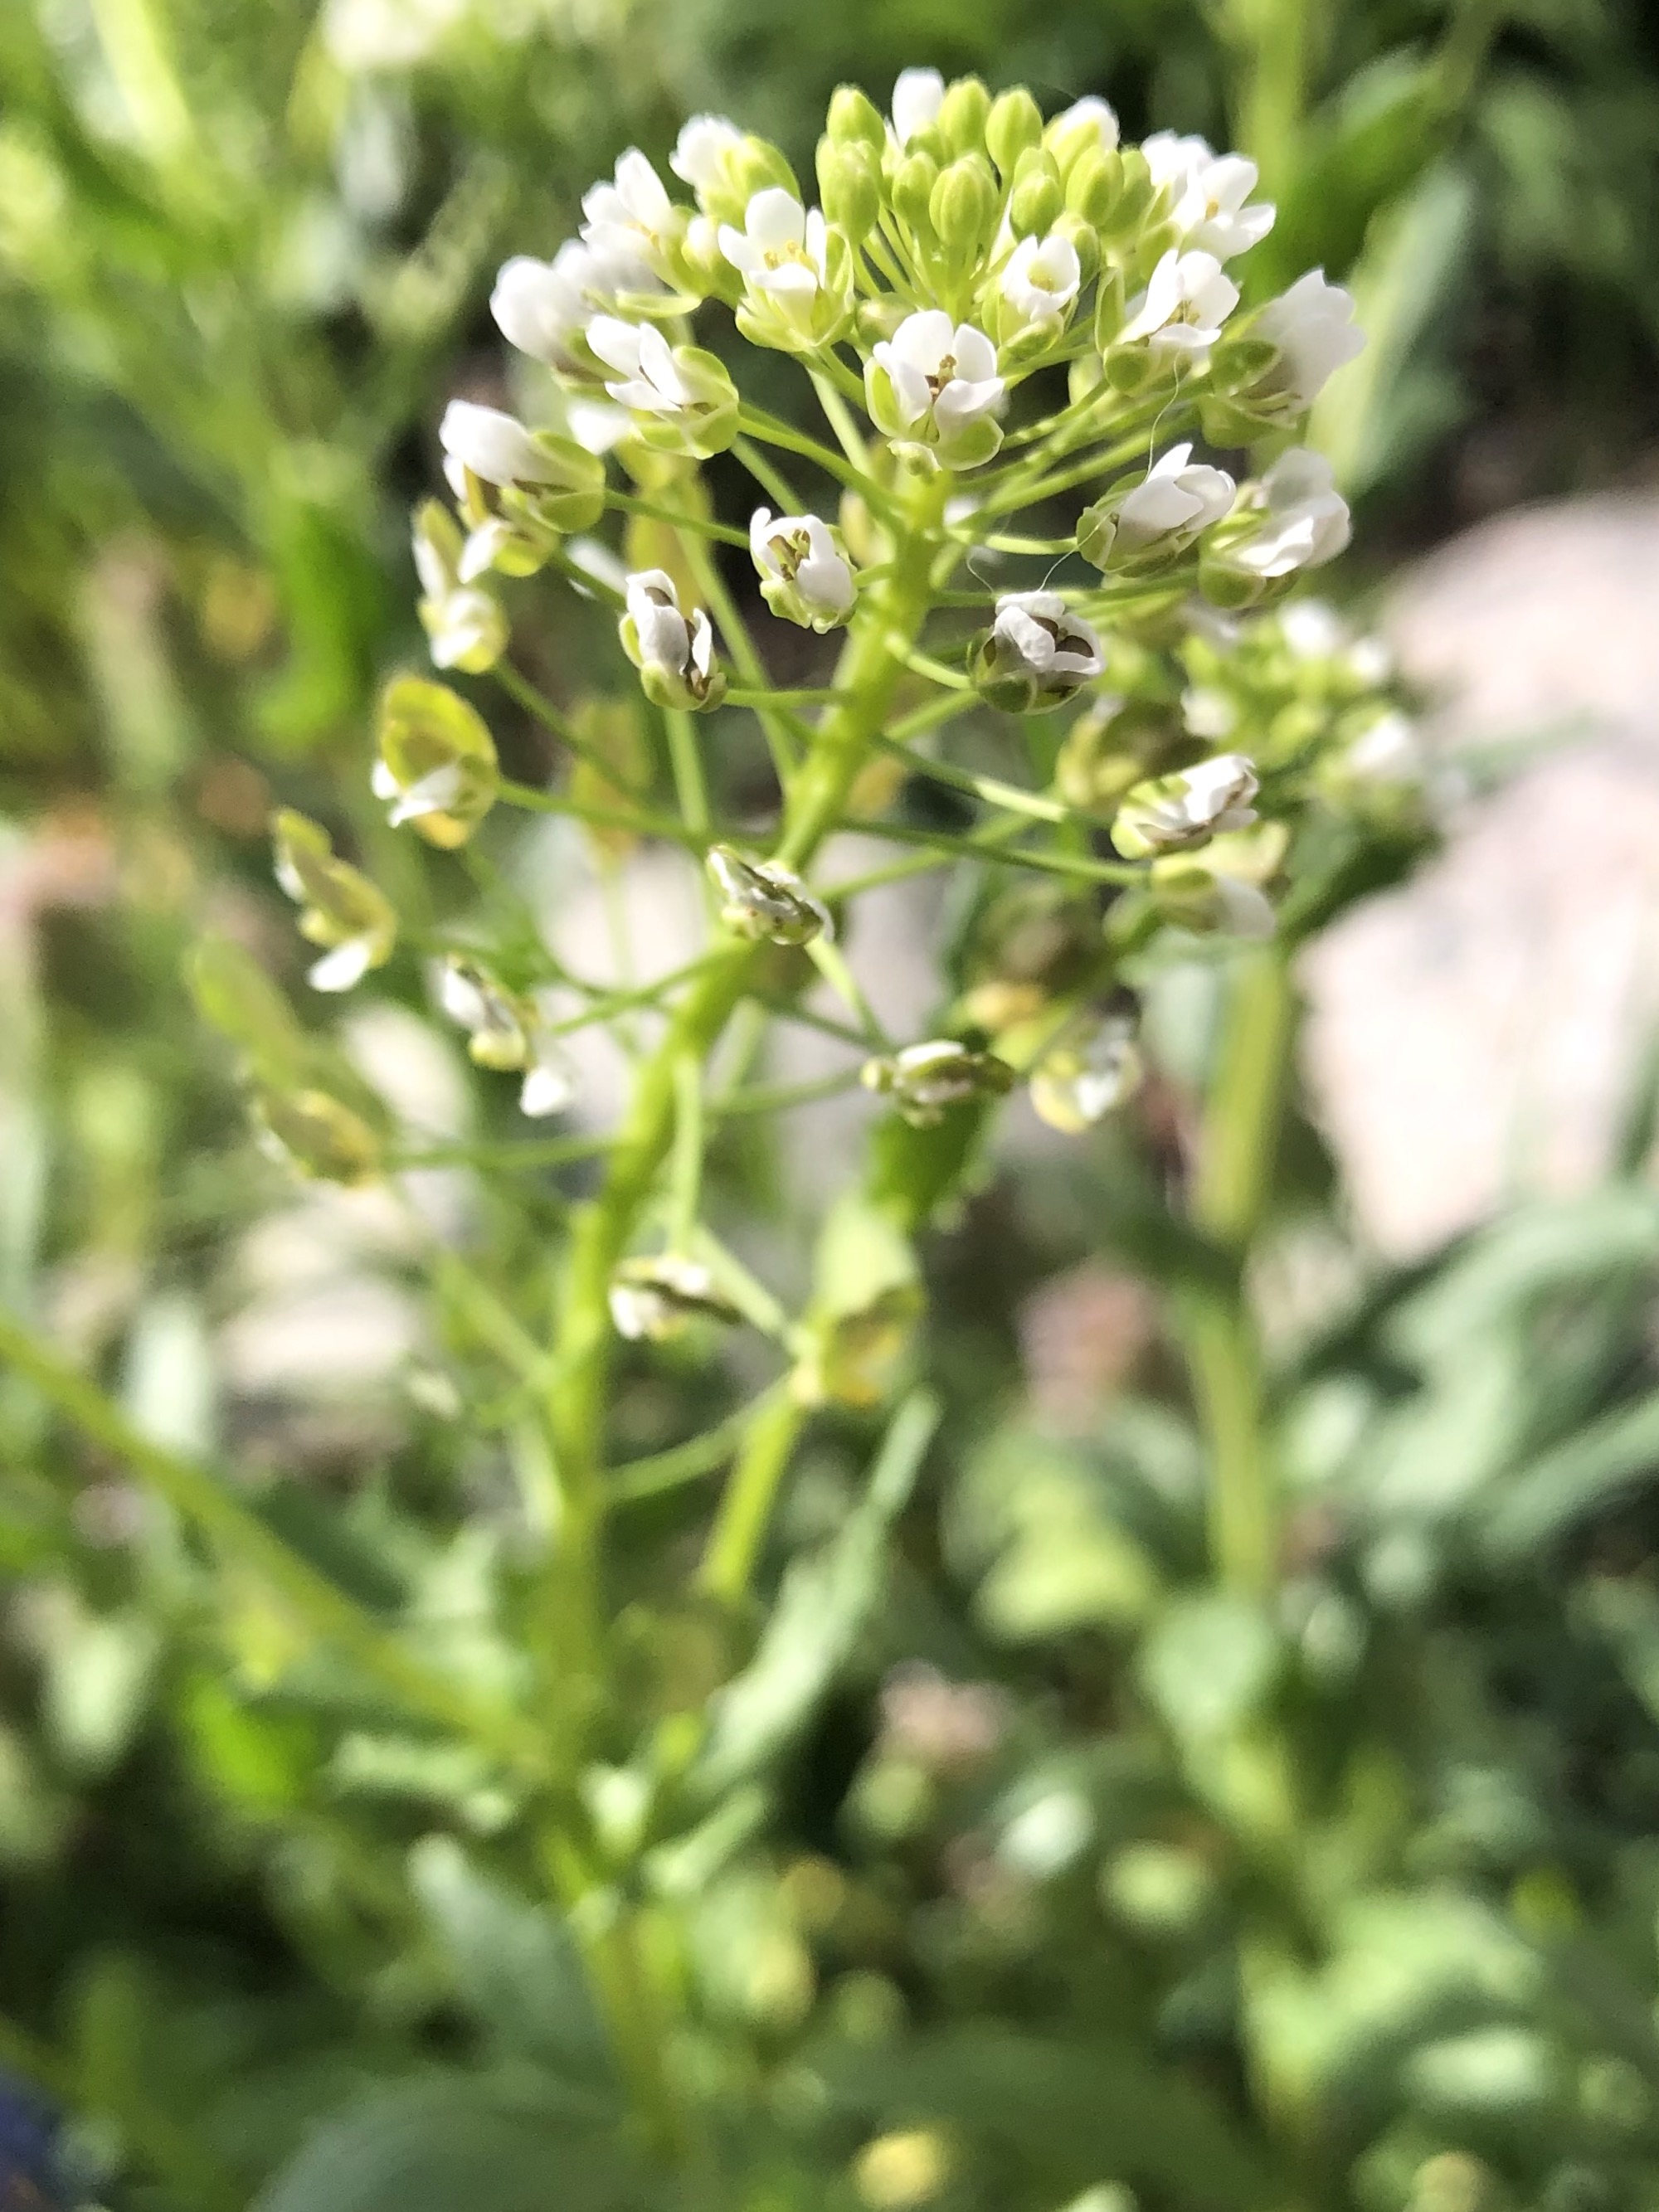 Field Pennycress near retaining pond on corner of Manitou Way and Nakoma Road in Madison, Wisconsin on May 4, 2021.